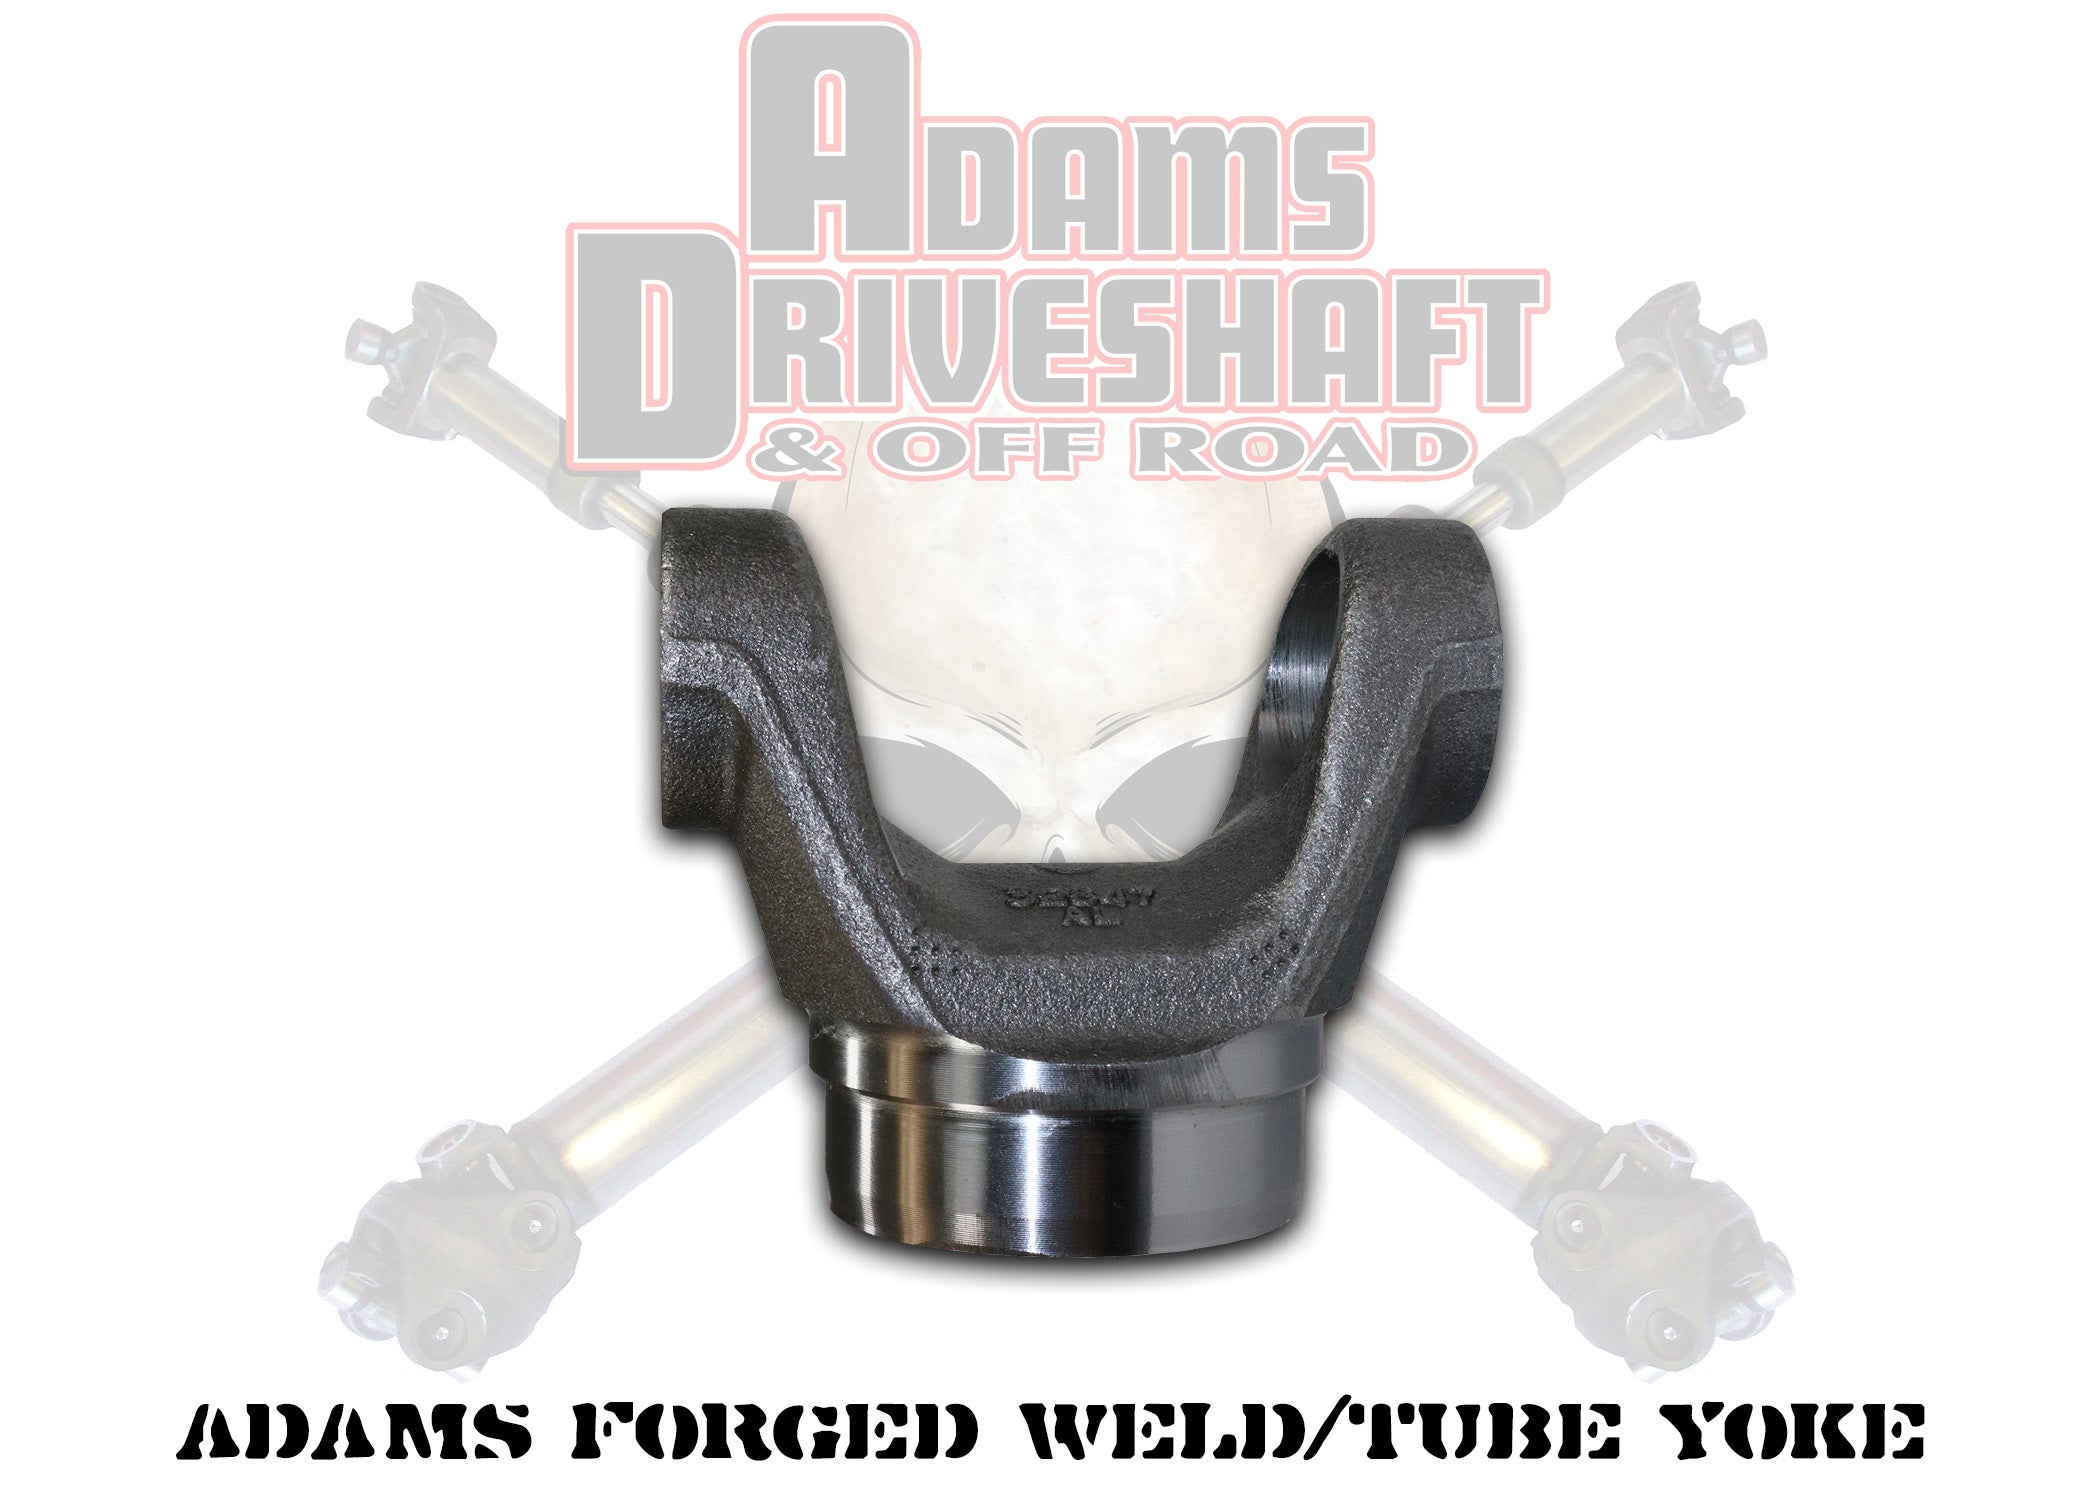 Adams Driveshaft's Build your Own - DIY - Offroad Buggy, Jeep Driveshaft, Etc. in 1350 Series